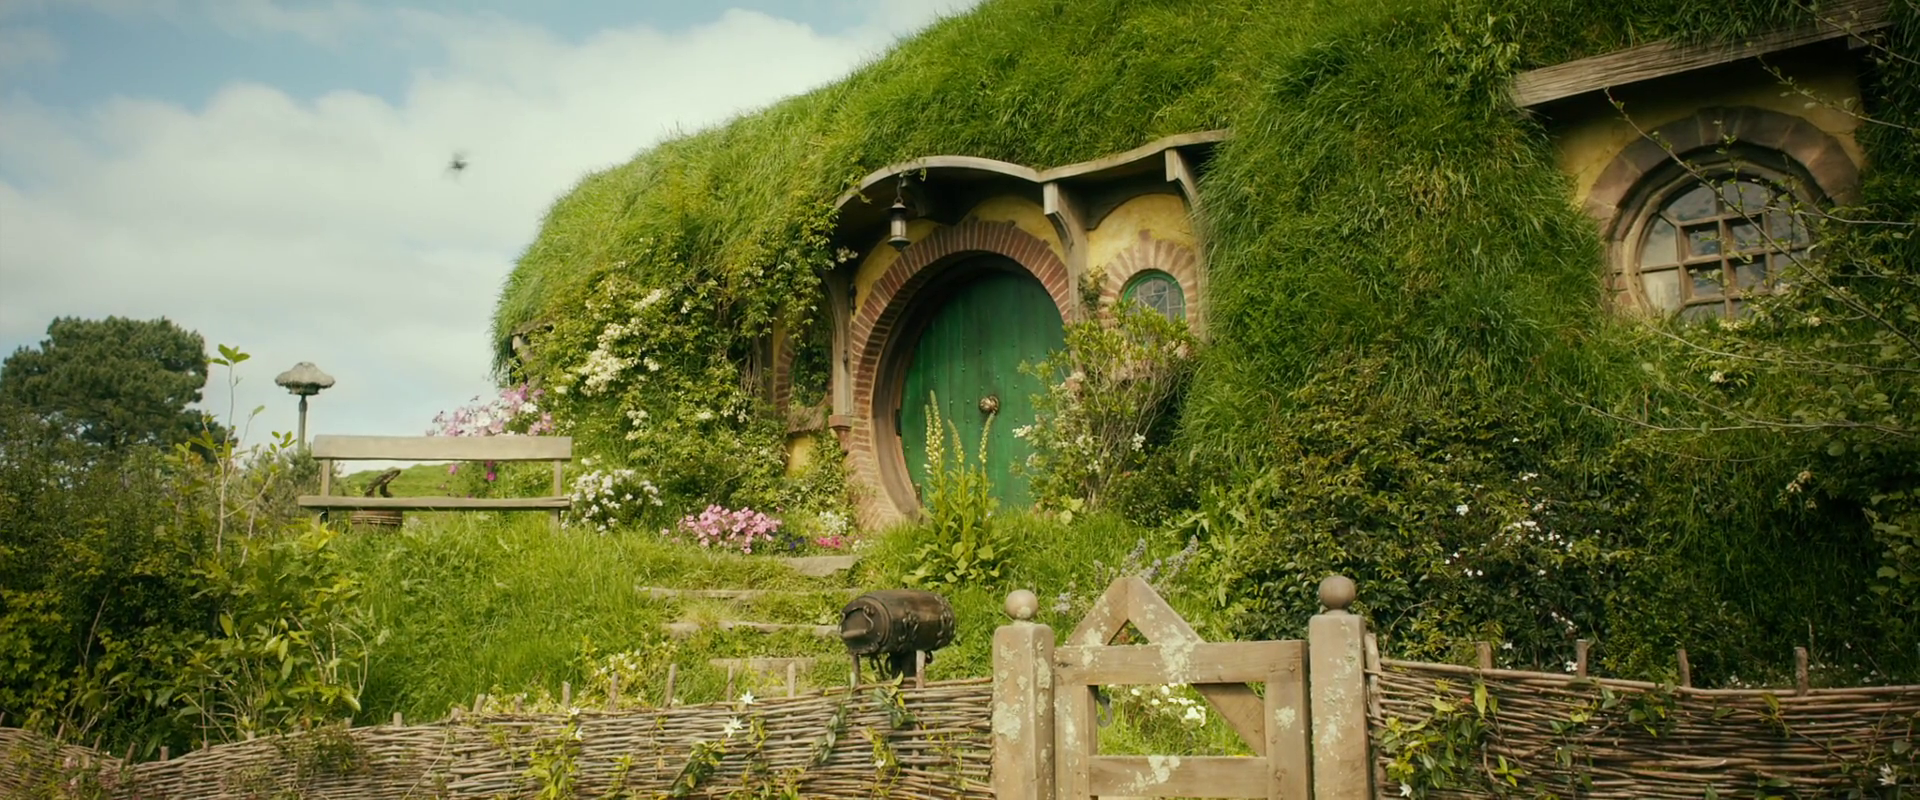 Bag End in the Shire at the Hobbiton Movie Set